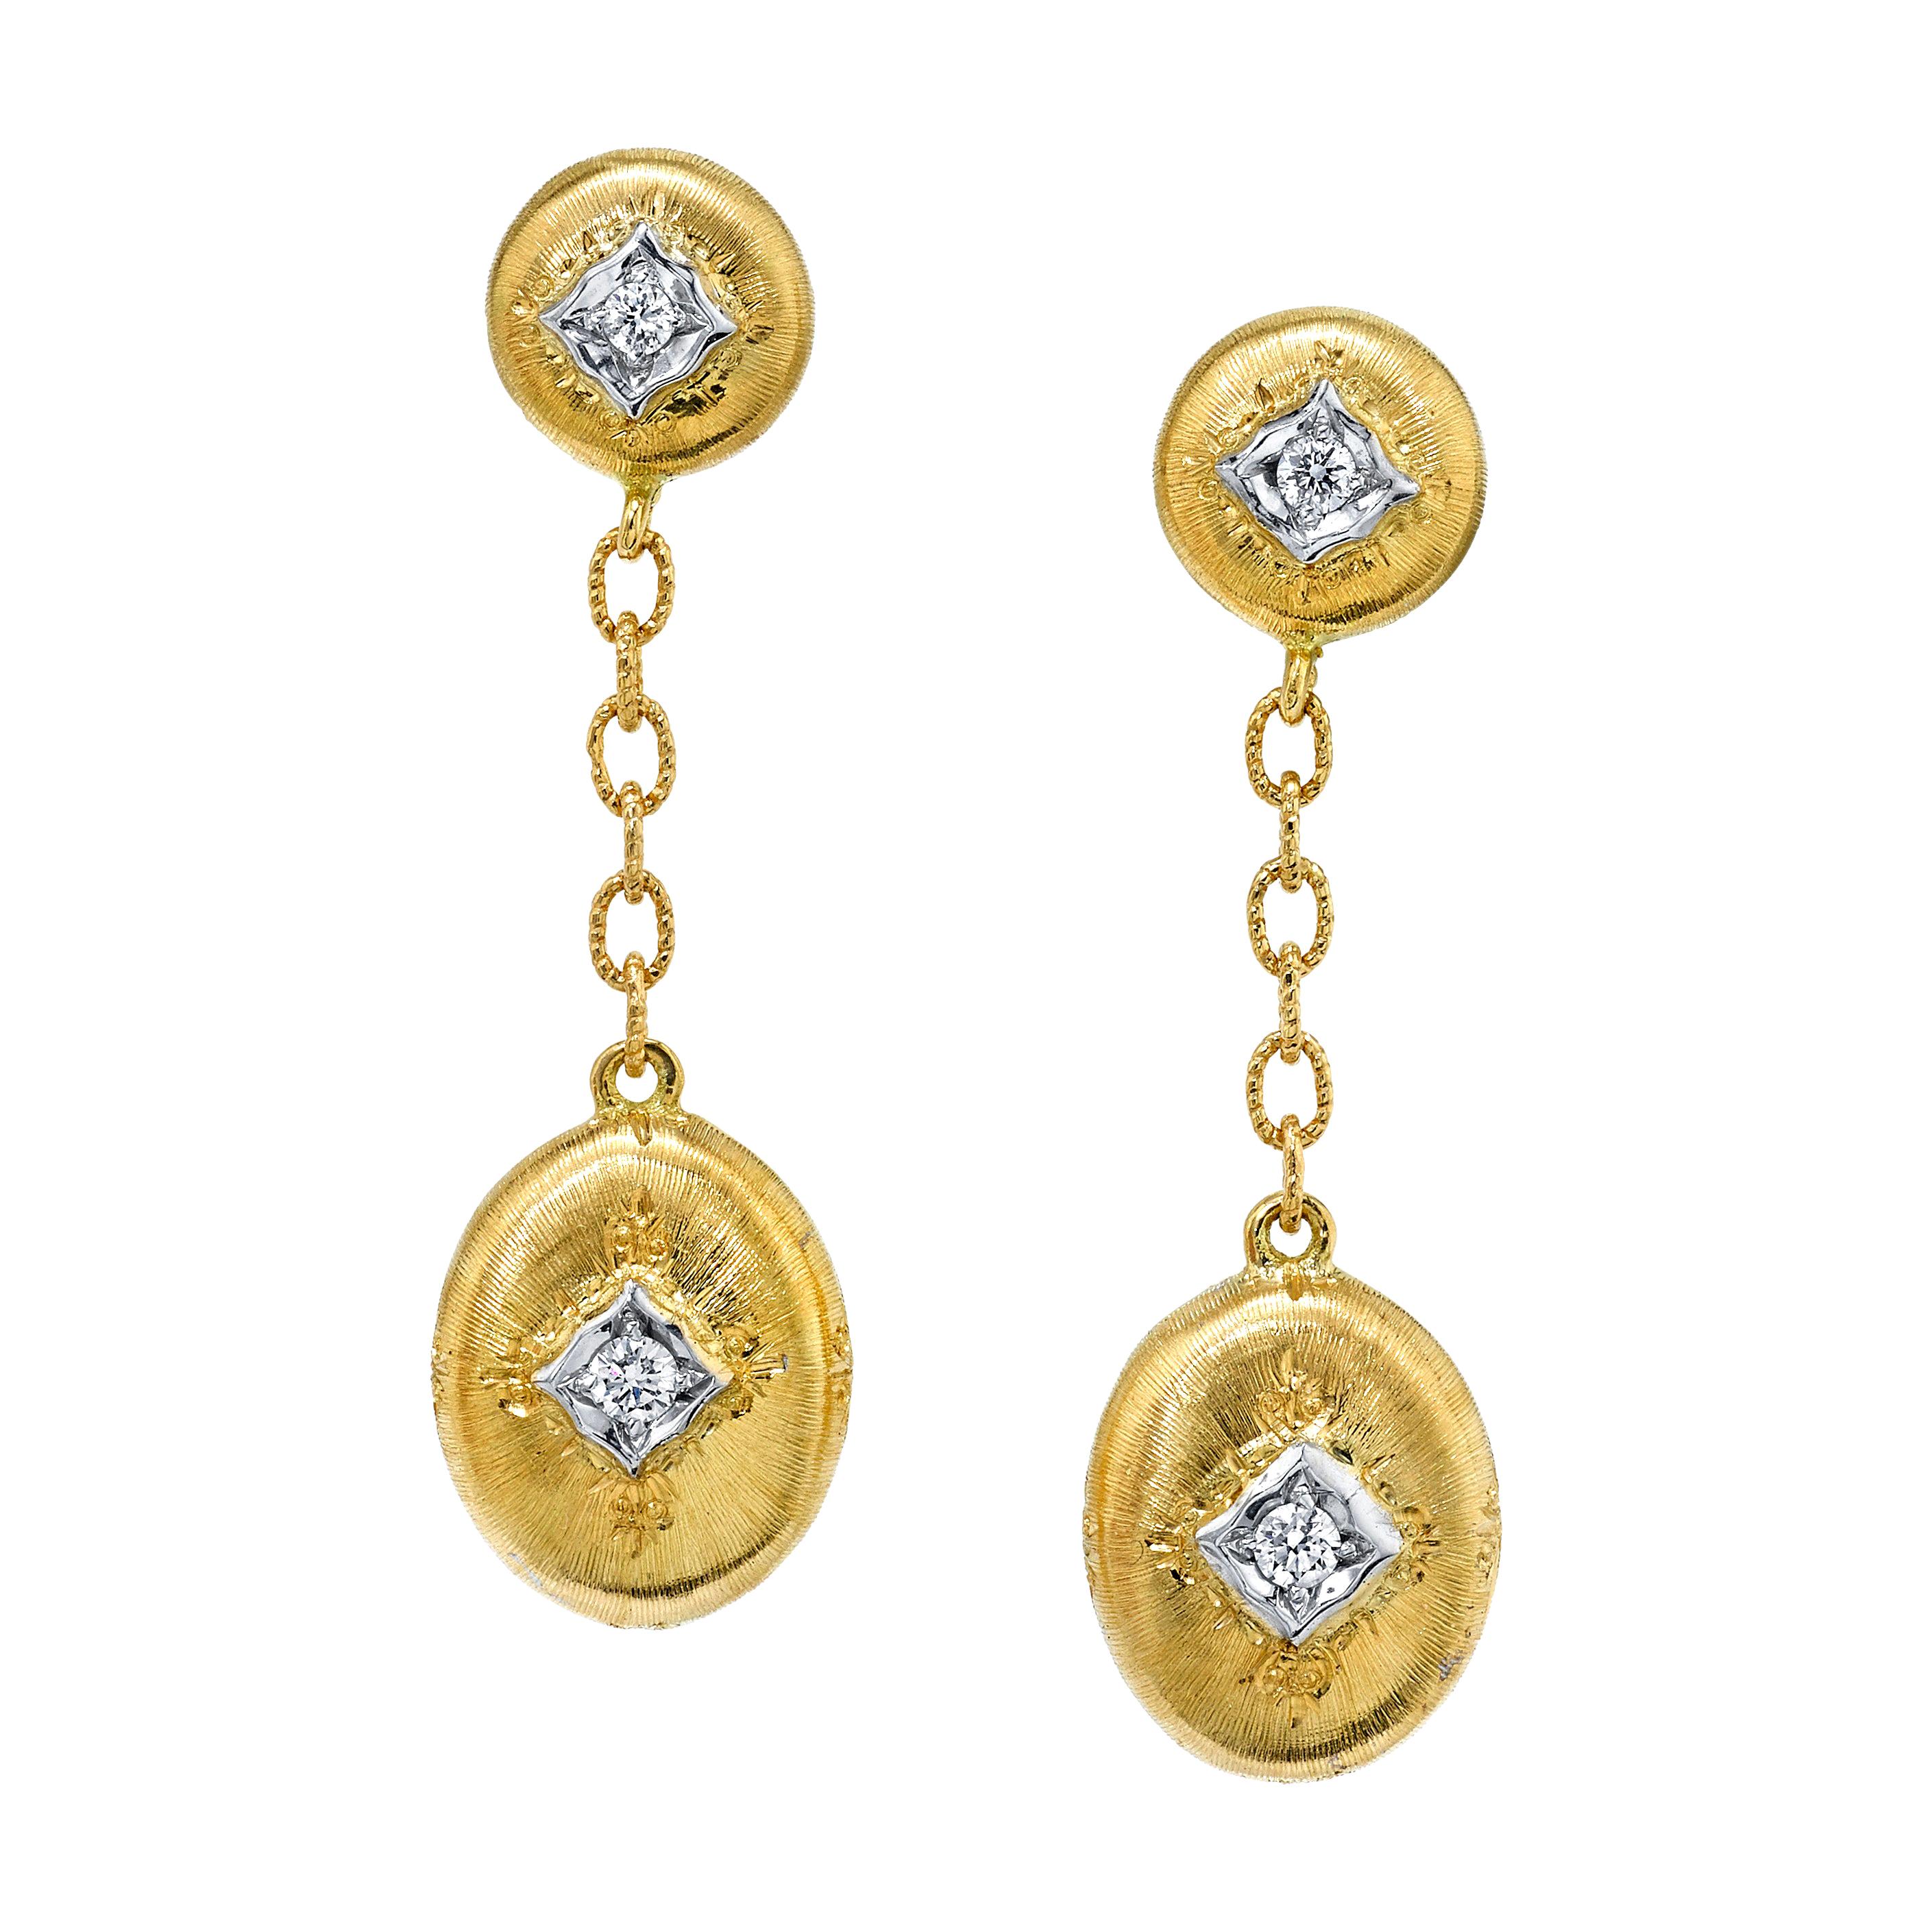 Diamond, Yellow and White Gold Florentine Style Dangle Drop Earrings